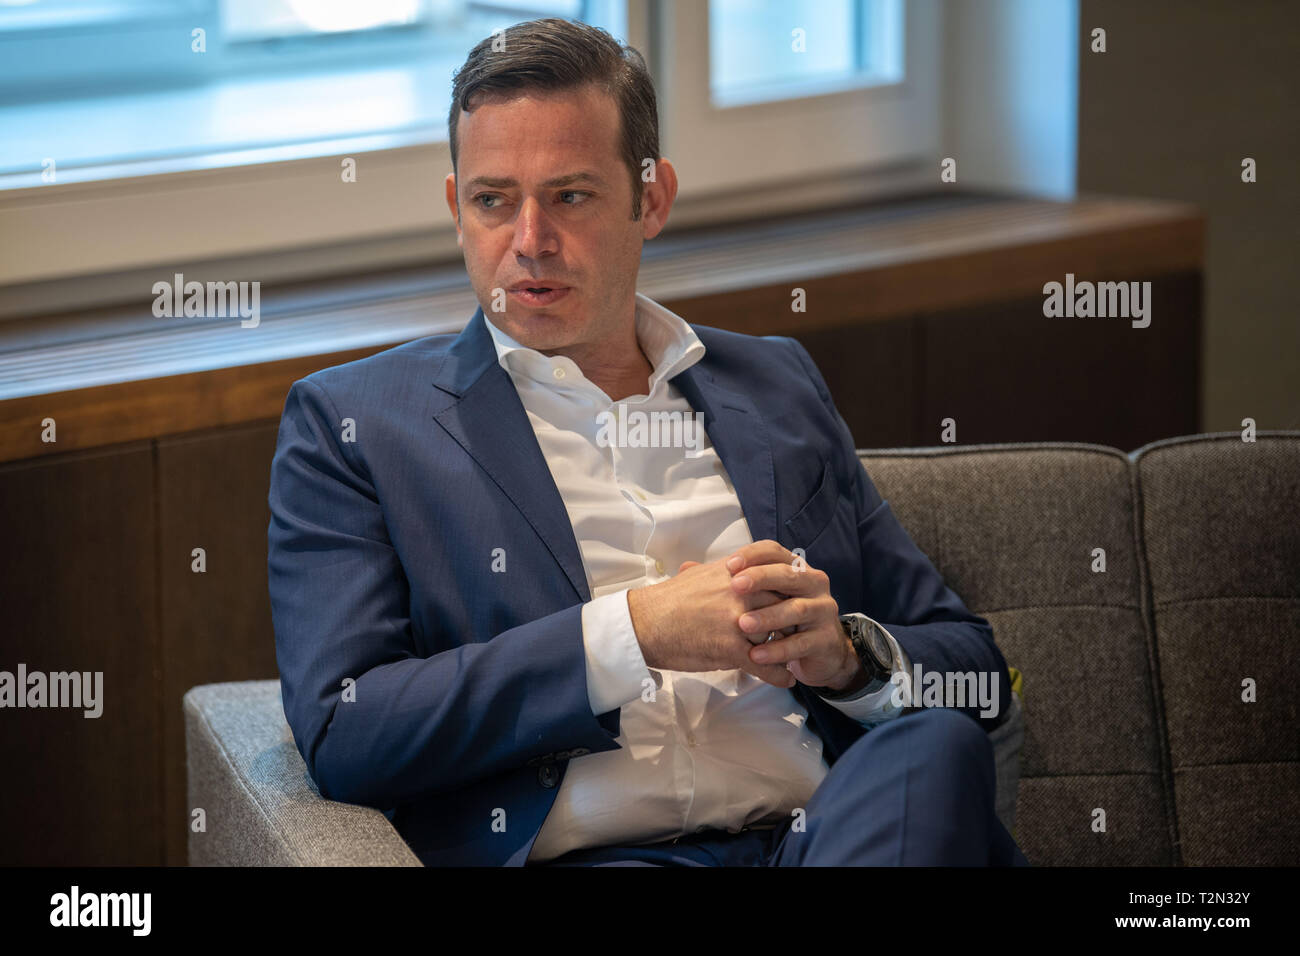 03 April 2019, Bavaria, München: Christian Hirmer, head of the Hirmer Group, sits on the sofa in the Hirmer fashion house during a sit-in. At a press event to present a new image campaign, actor Ferch talked about style and taste. Photo: Lino Mirgeler/dpa Stock Photo